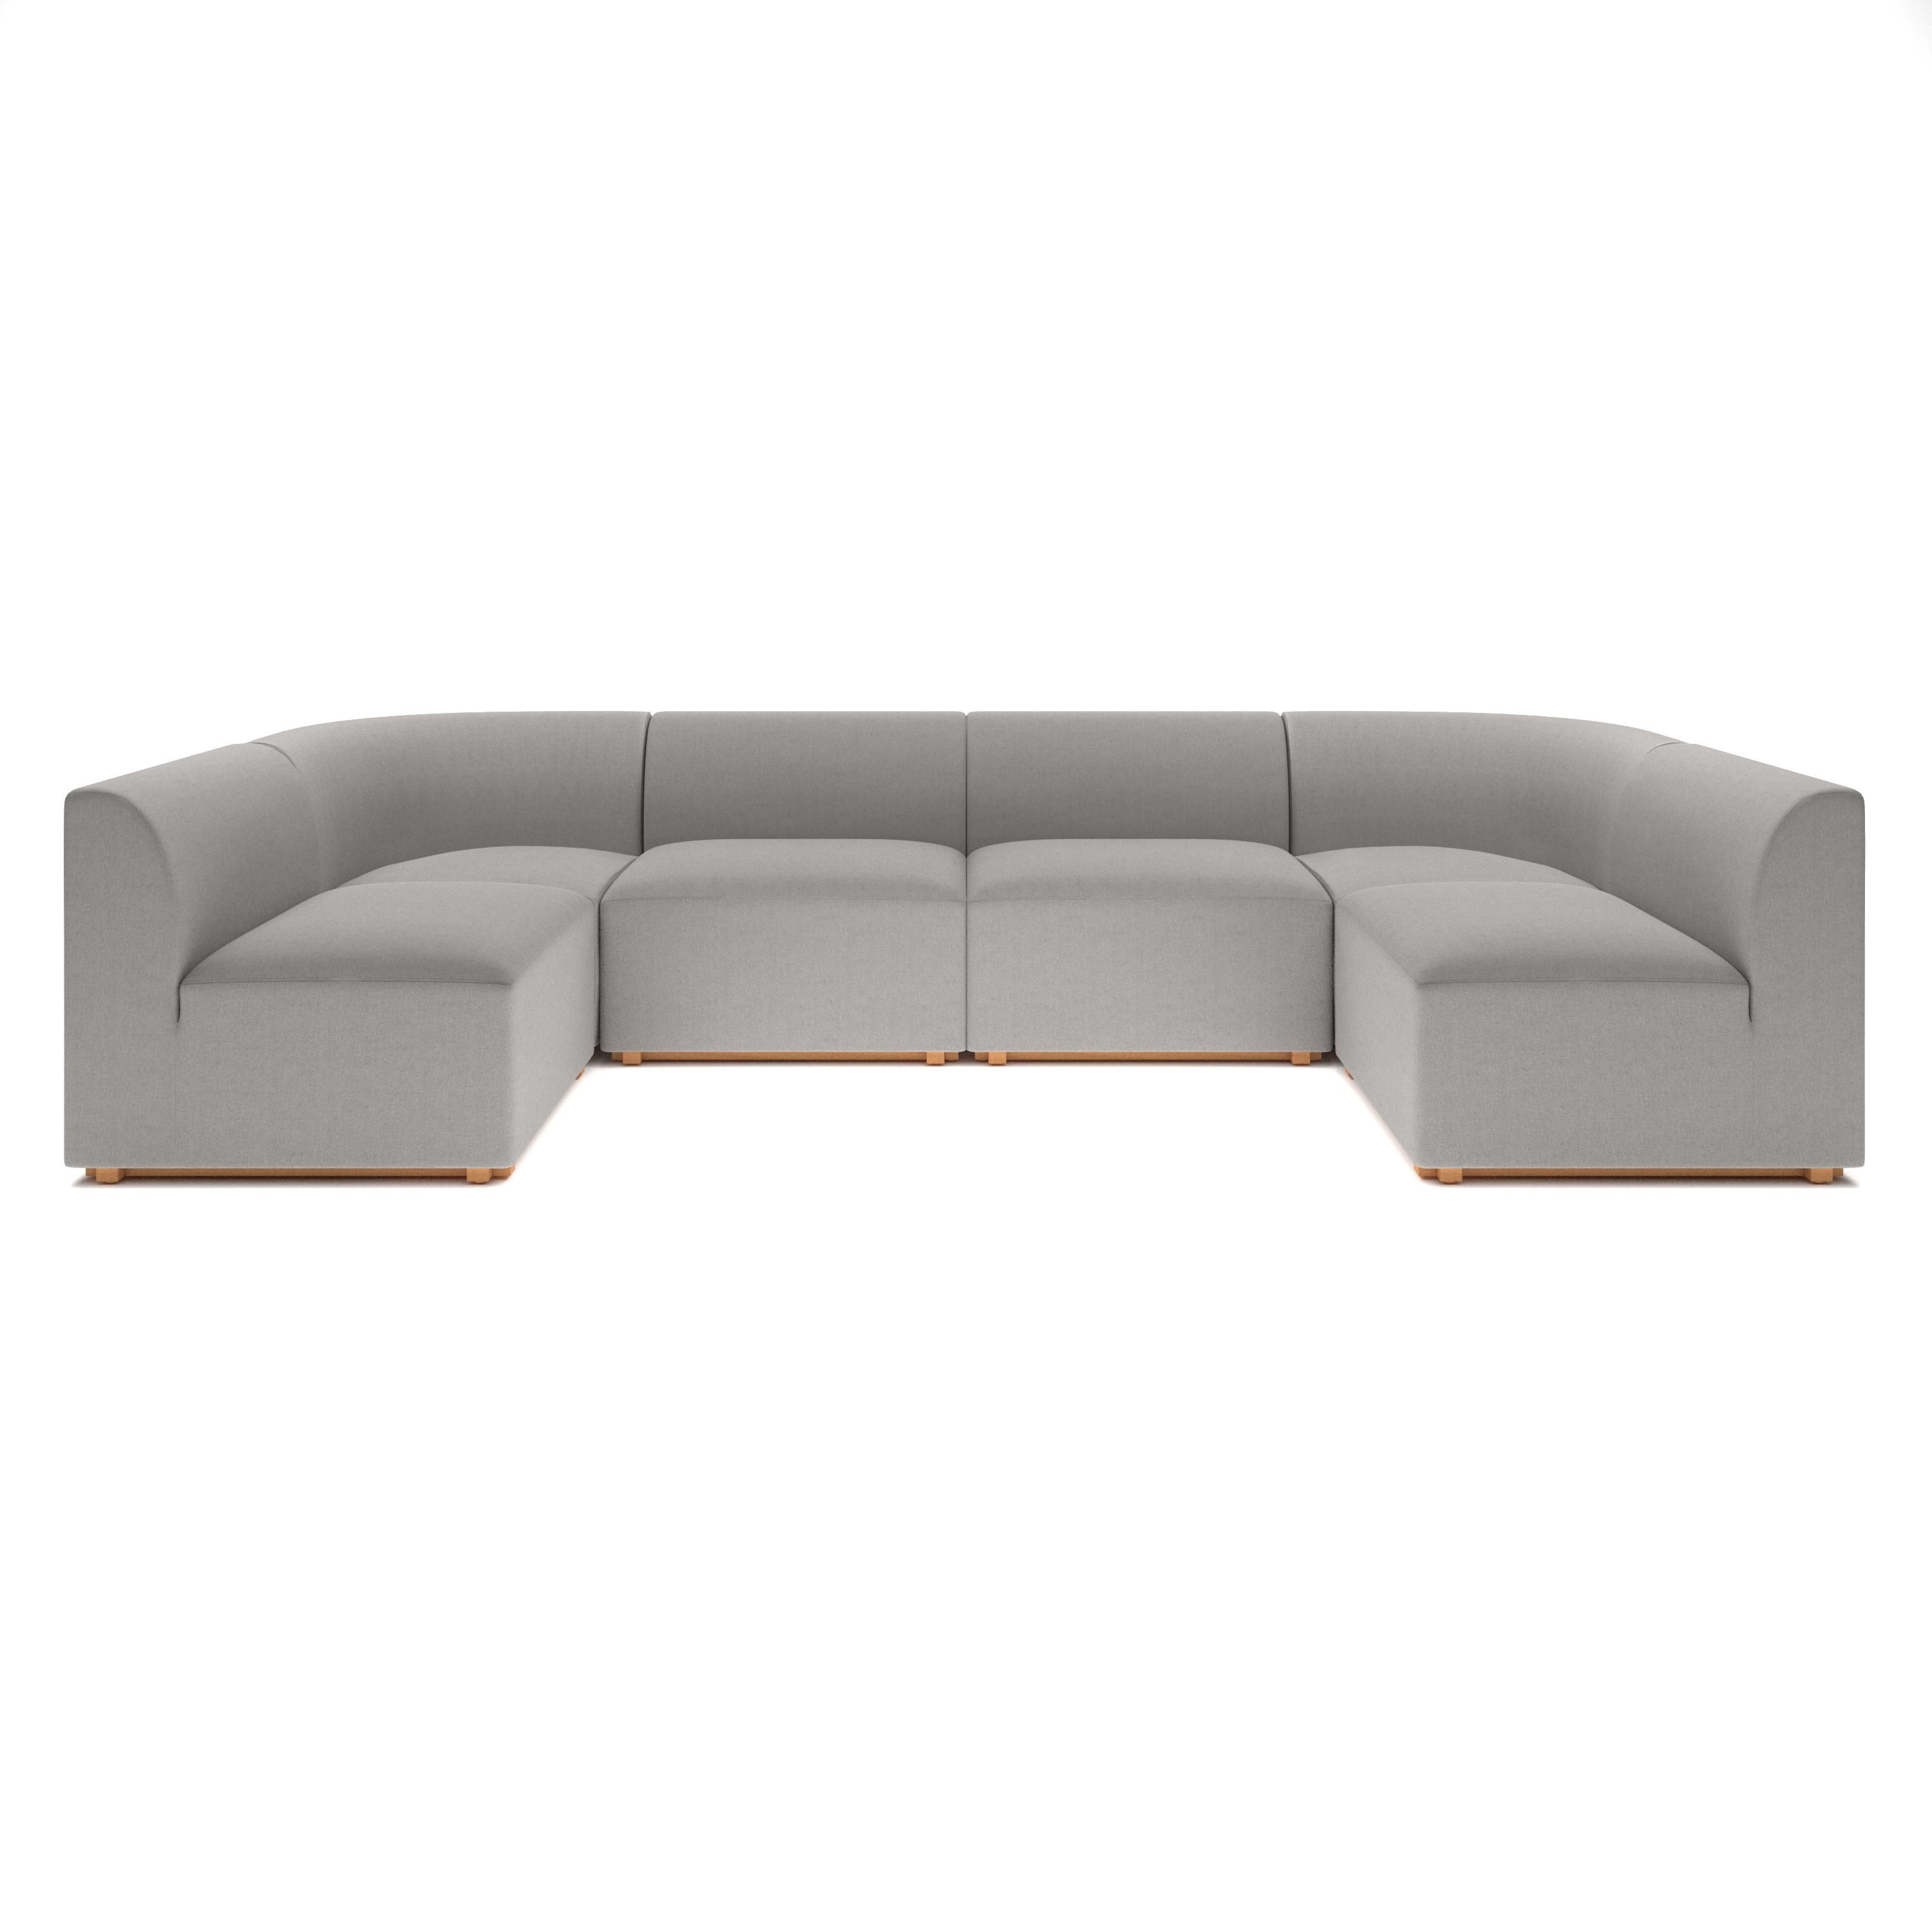 Blockhouse Modular Sectional – 6 Seat U Shaped Sofa | Rypen Collections |  Rypen With 6 Seater Modular Sectional Sofas (View 11 of 15)